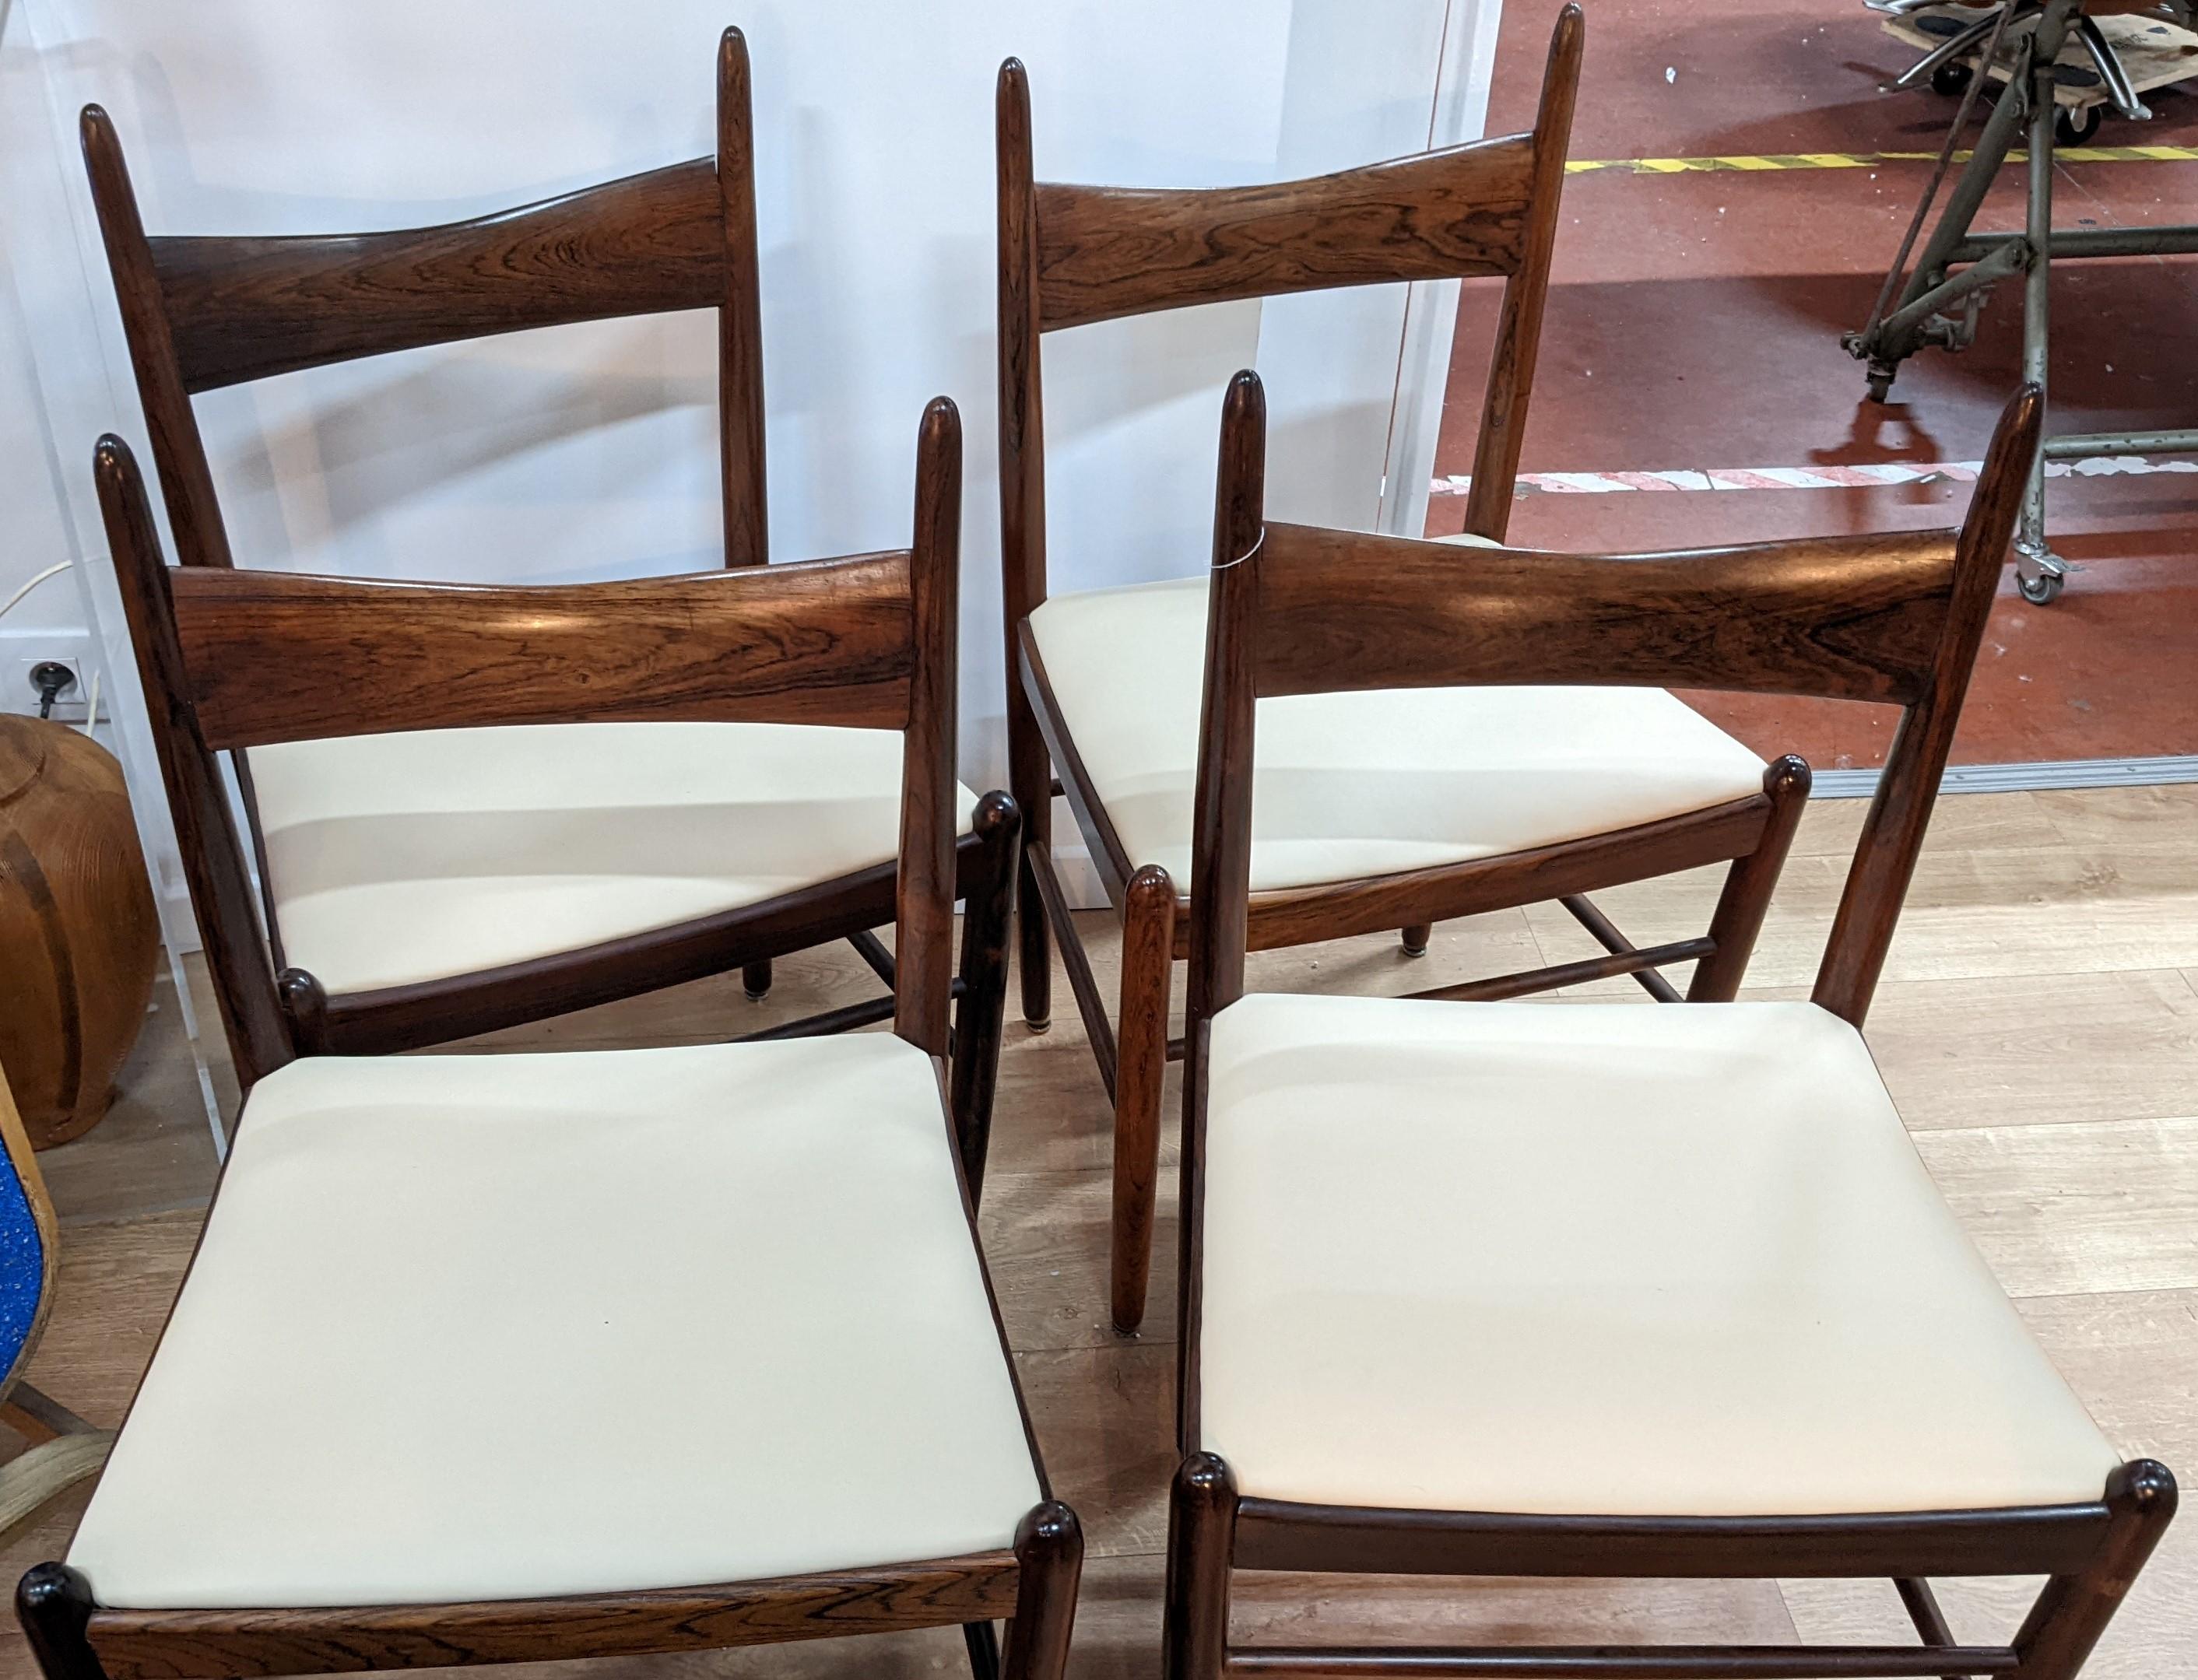 Very rare set of 4 chairs by Vestervig Eriksen for Tromborg Mobelfabrik, in rosewood, circa 1960.

Spindle legs, curved backrest and seat slightly hollowed out for comfort, the two pointed uprights of the backrest give it its singular